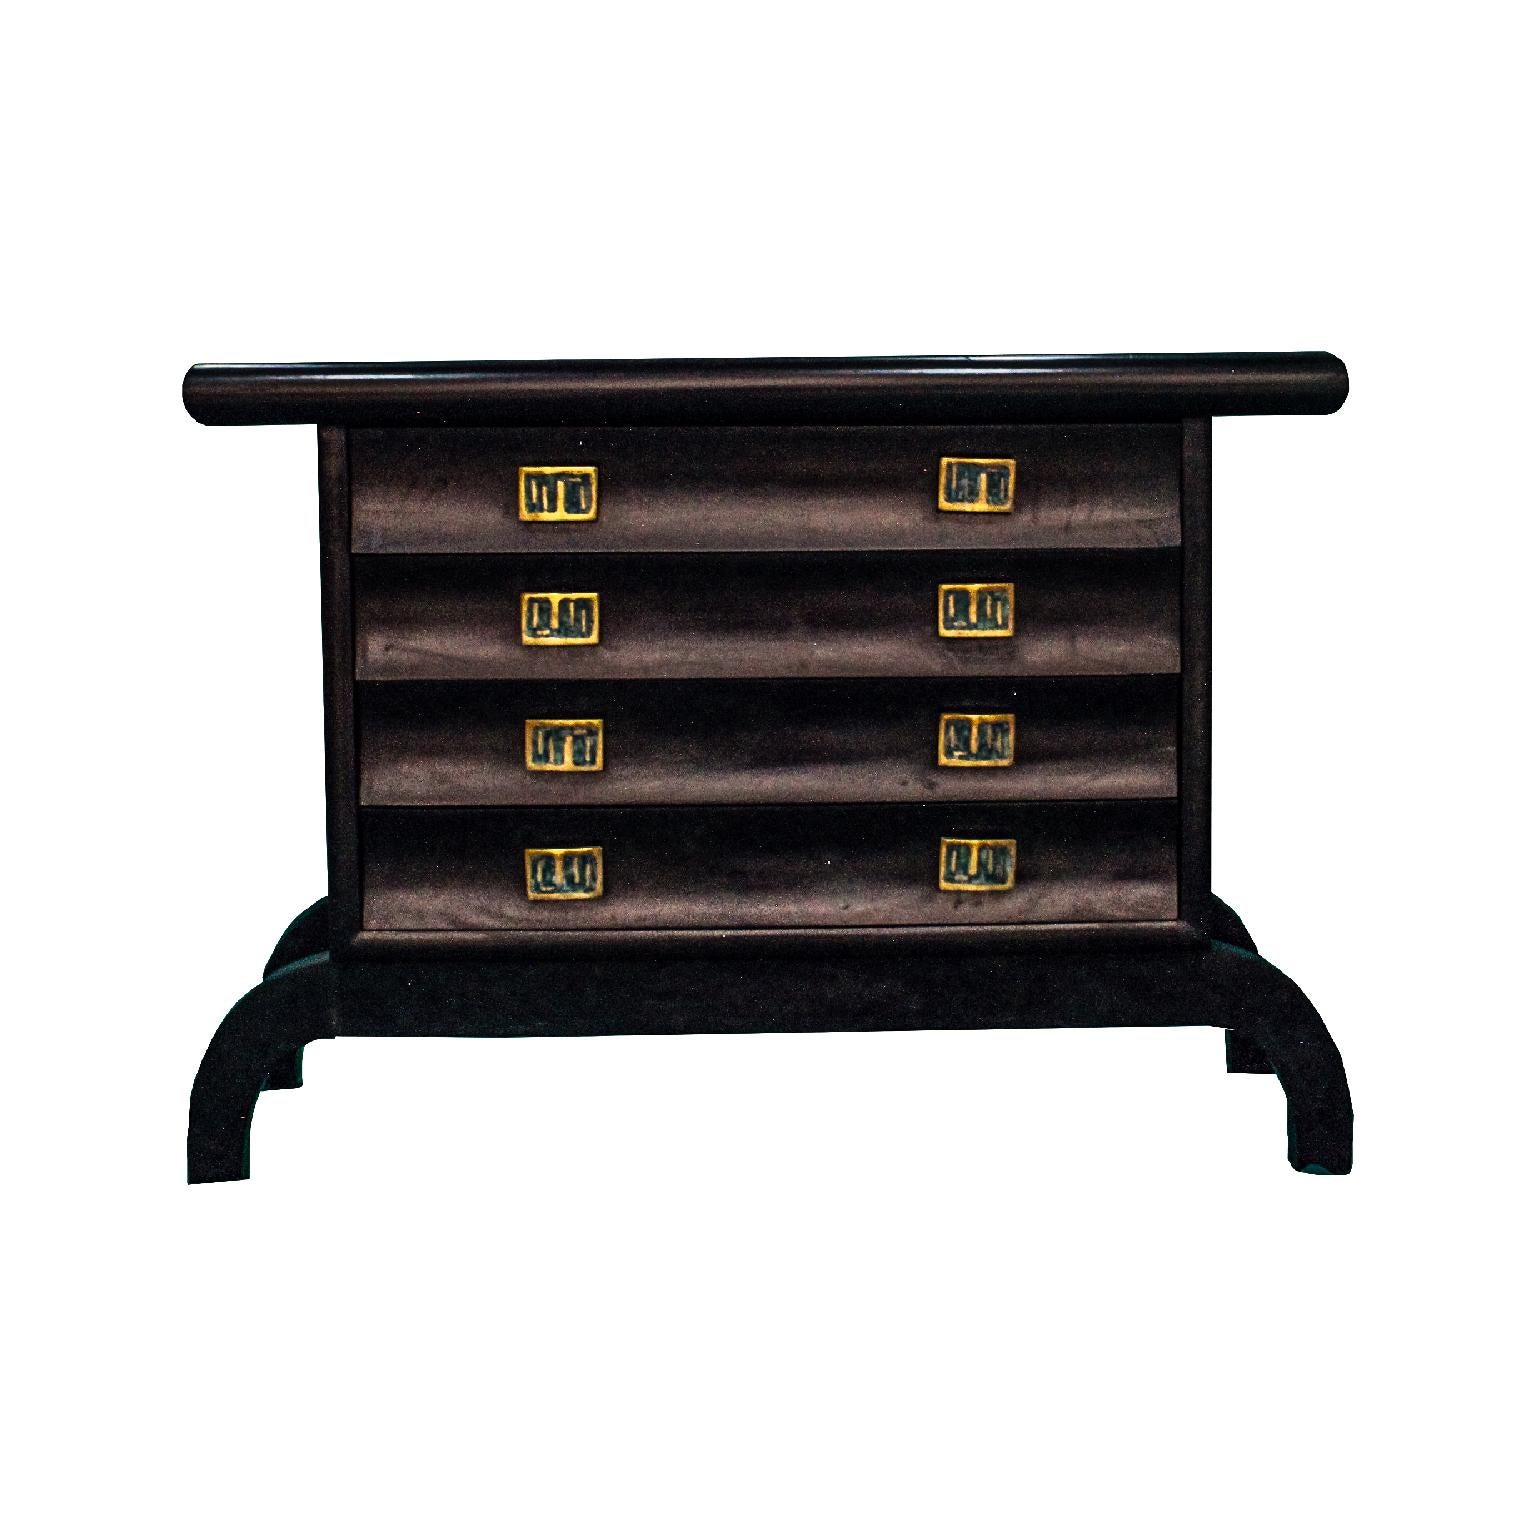 Pepe Mendoza chest of drawers in matte black
with four drawers and 8 brass jaladeras with malachite and the seal of Pepe Mendoza. The legs have a slight curve making it very stabile and modernist design.